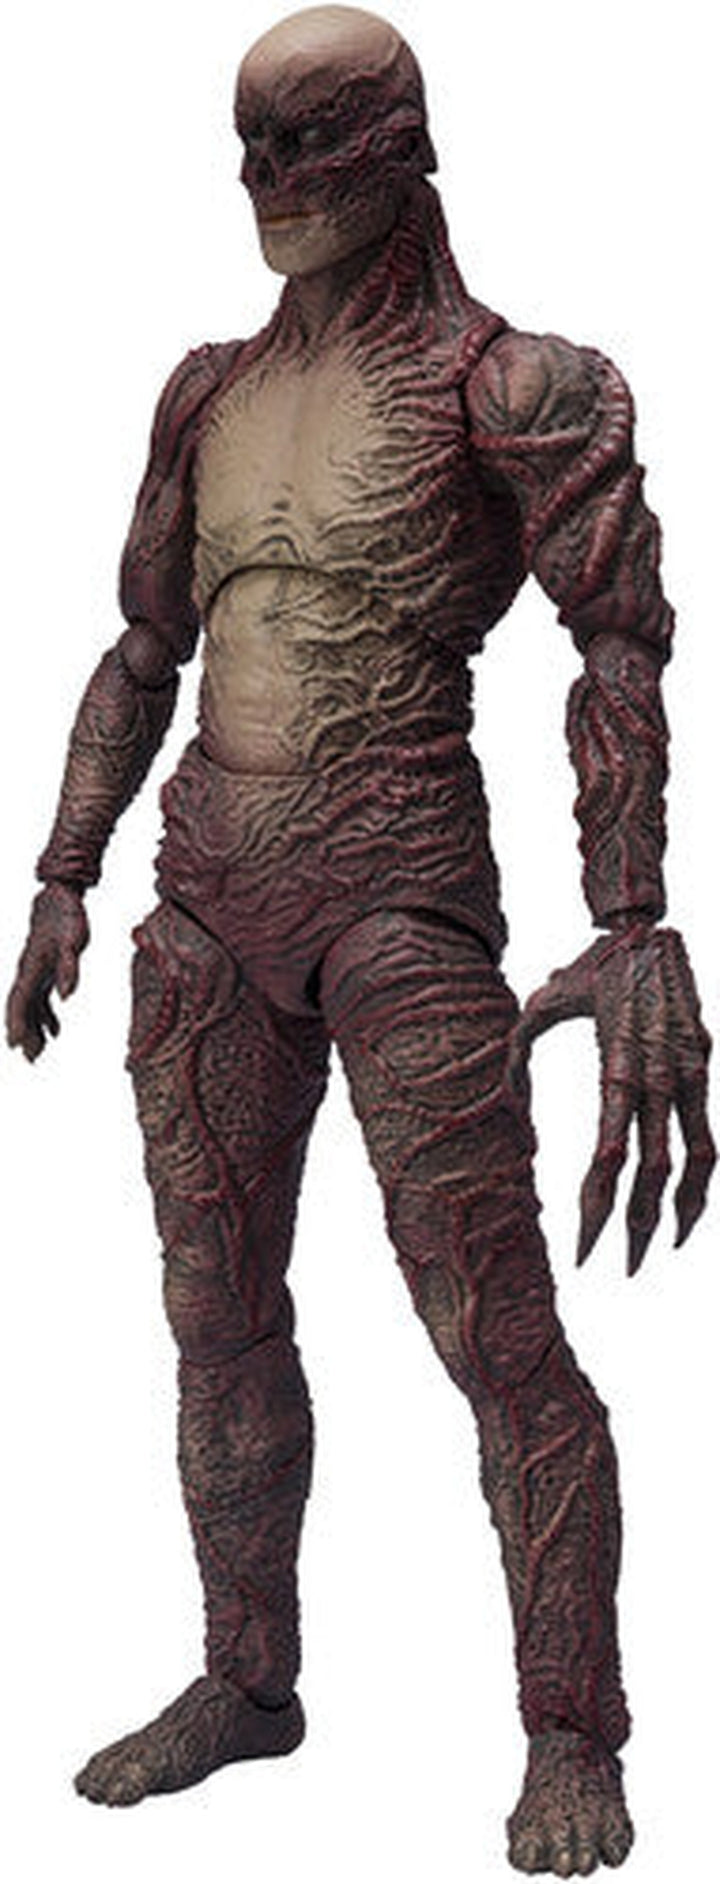 Bandai - Stranger Things - 6" Vecna Premium Collectible Action Figure (The Void Series)